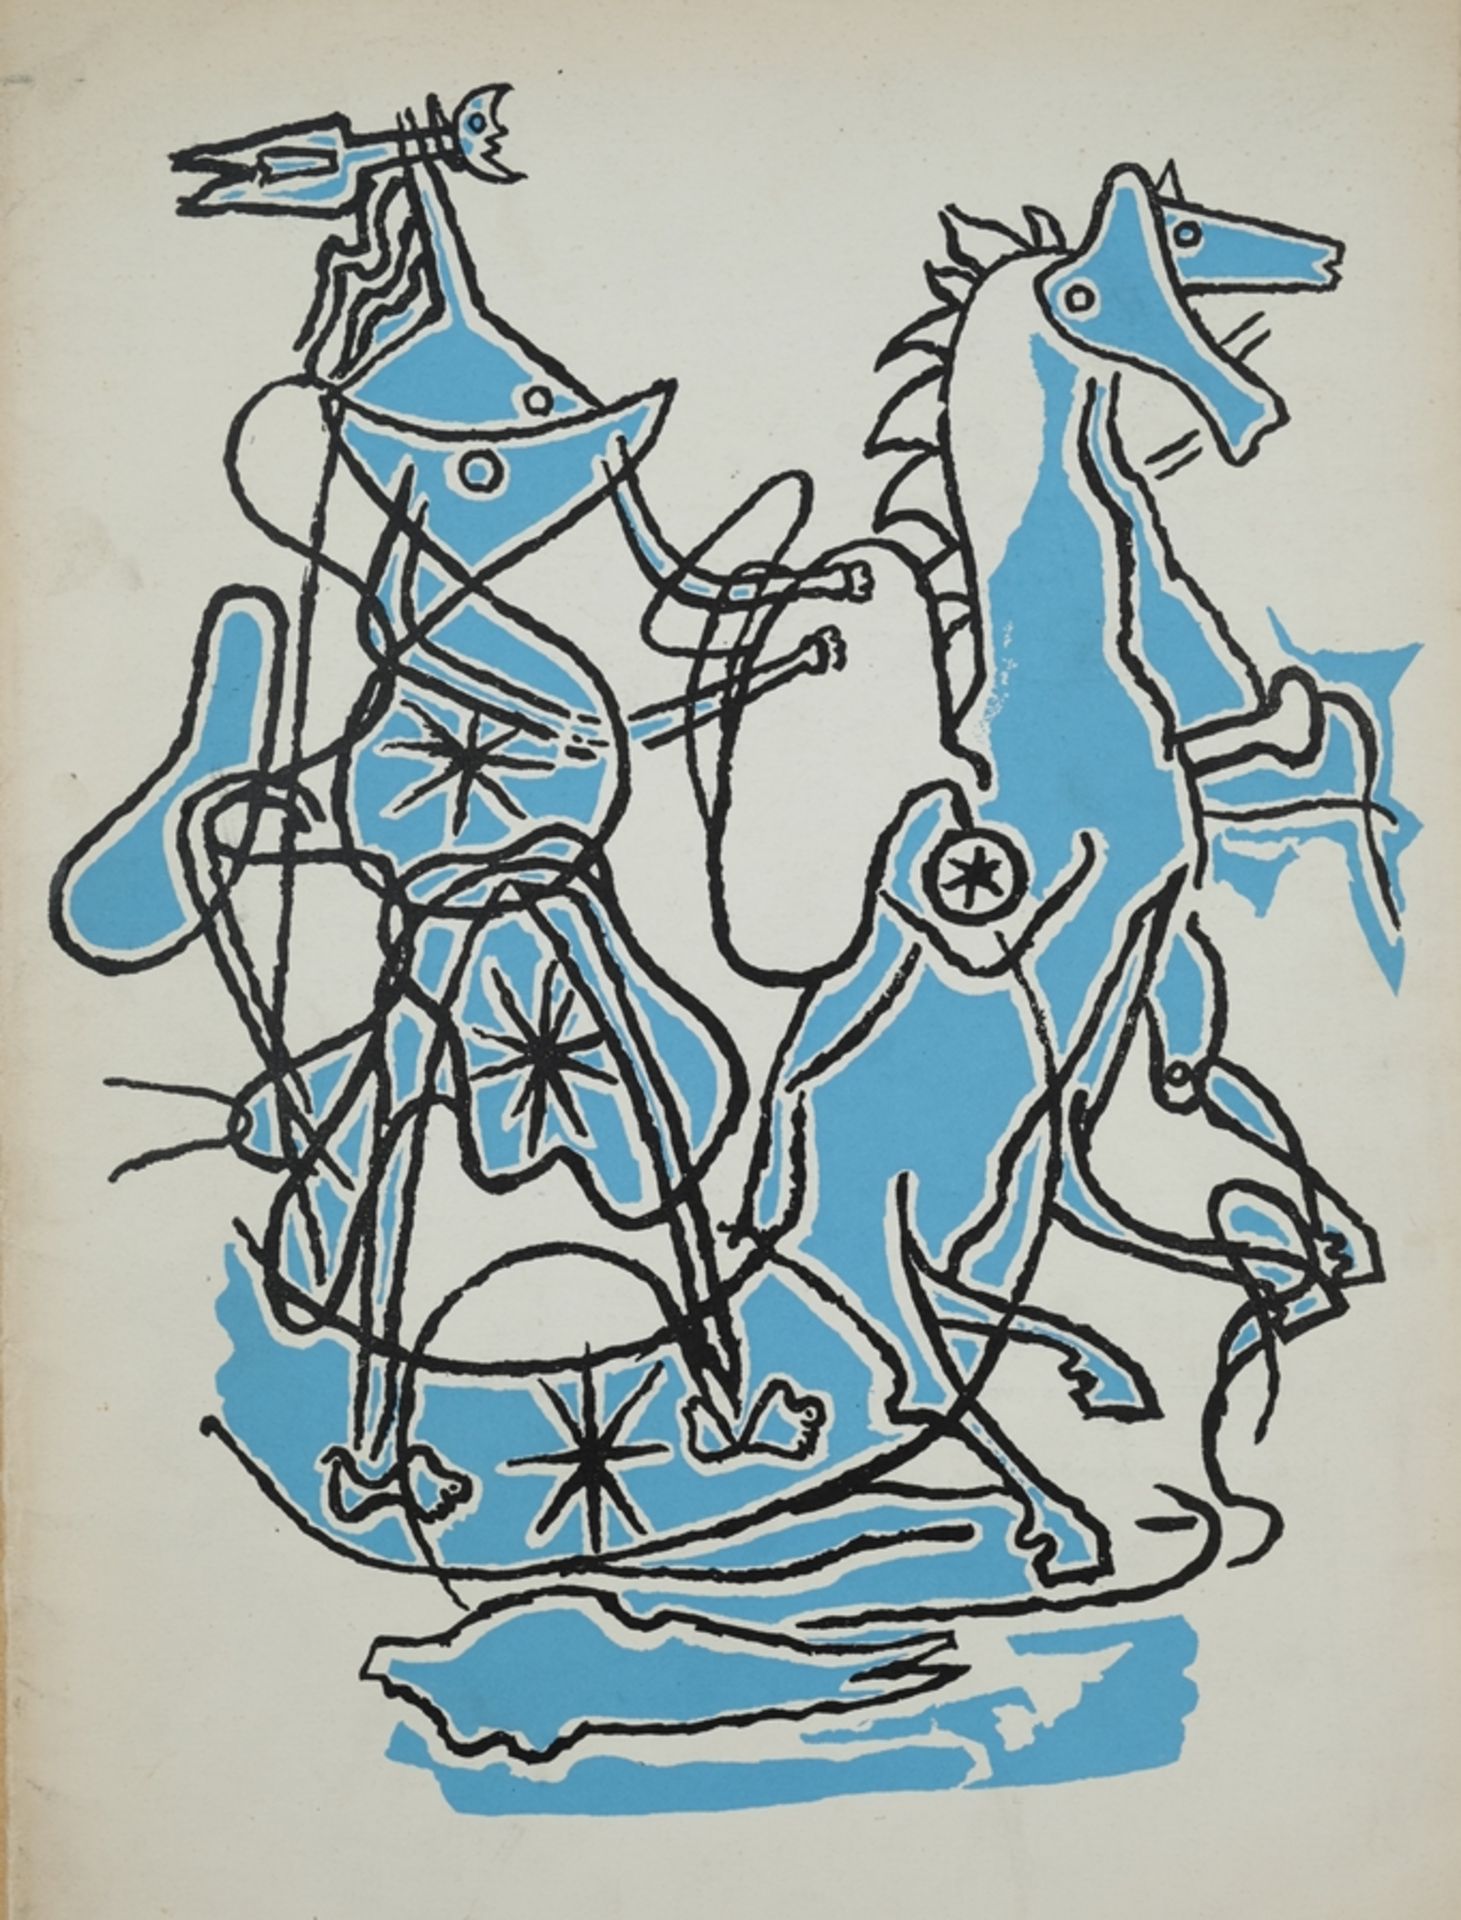 Braque, Georges (1882-1963) Colour lithograph from exhibition catalogue, 1955. 